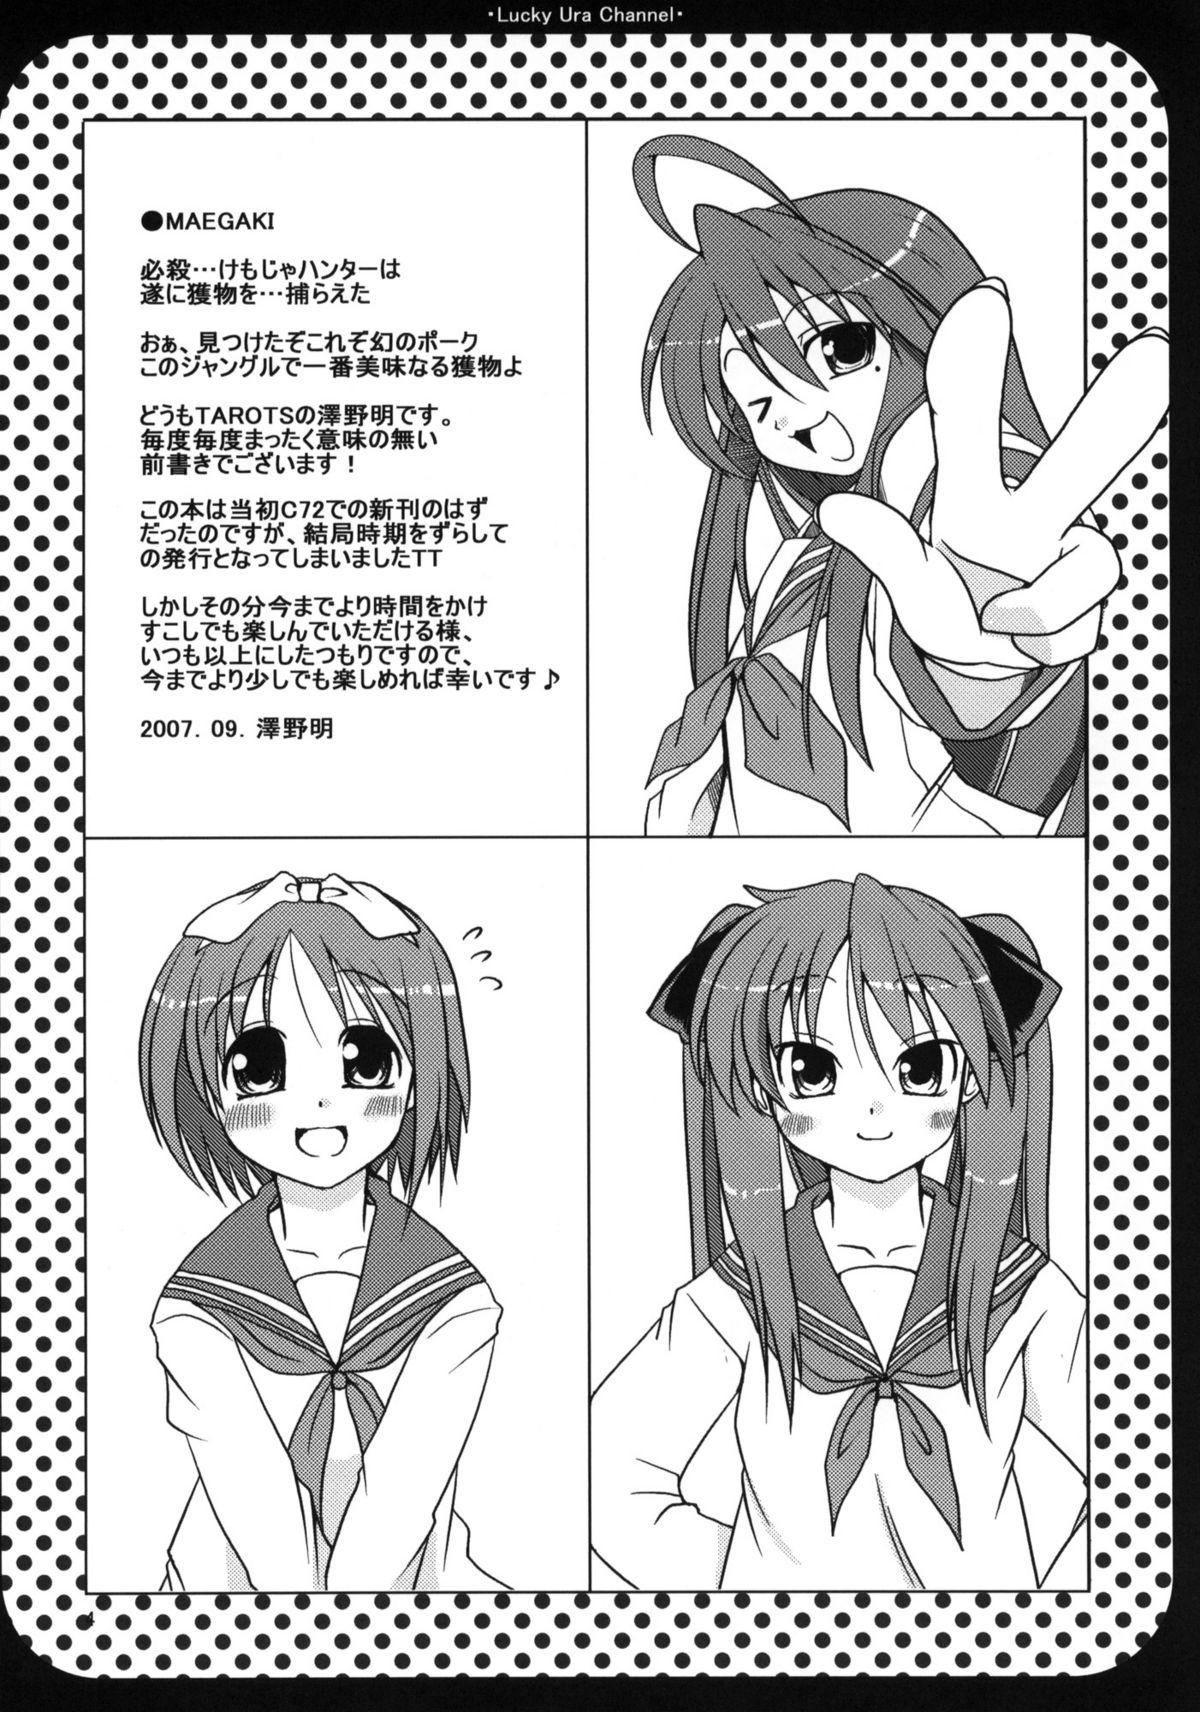 Perfect Lucky Ura Channel - Lucky star Wam - Page 3